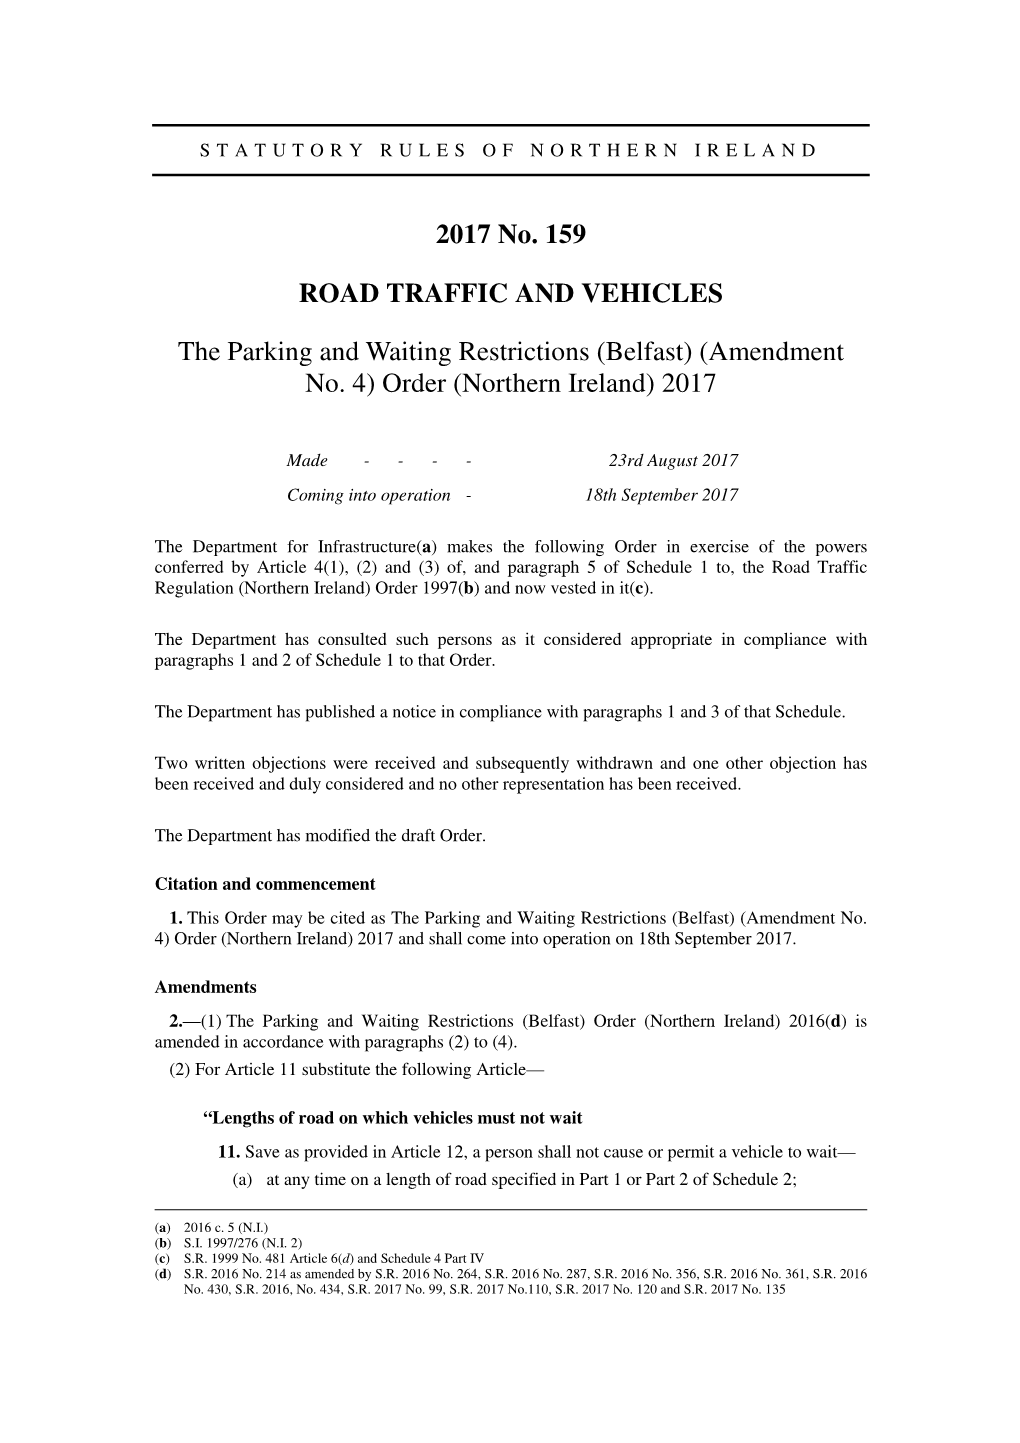 The Parking and Waiting Restrictions (Belfast) (Amendment No. 4) Order (Northern Ireland) 2017